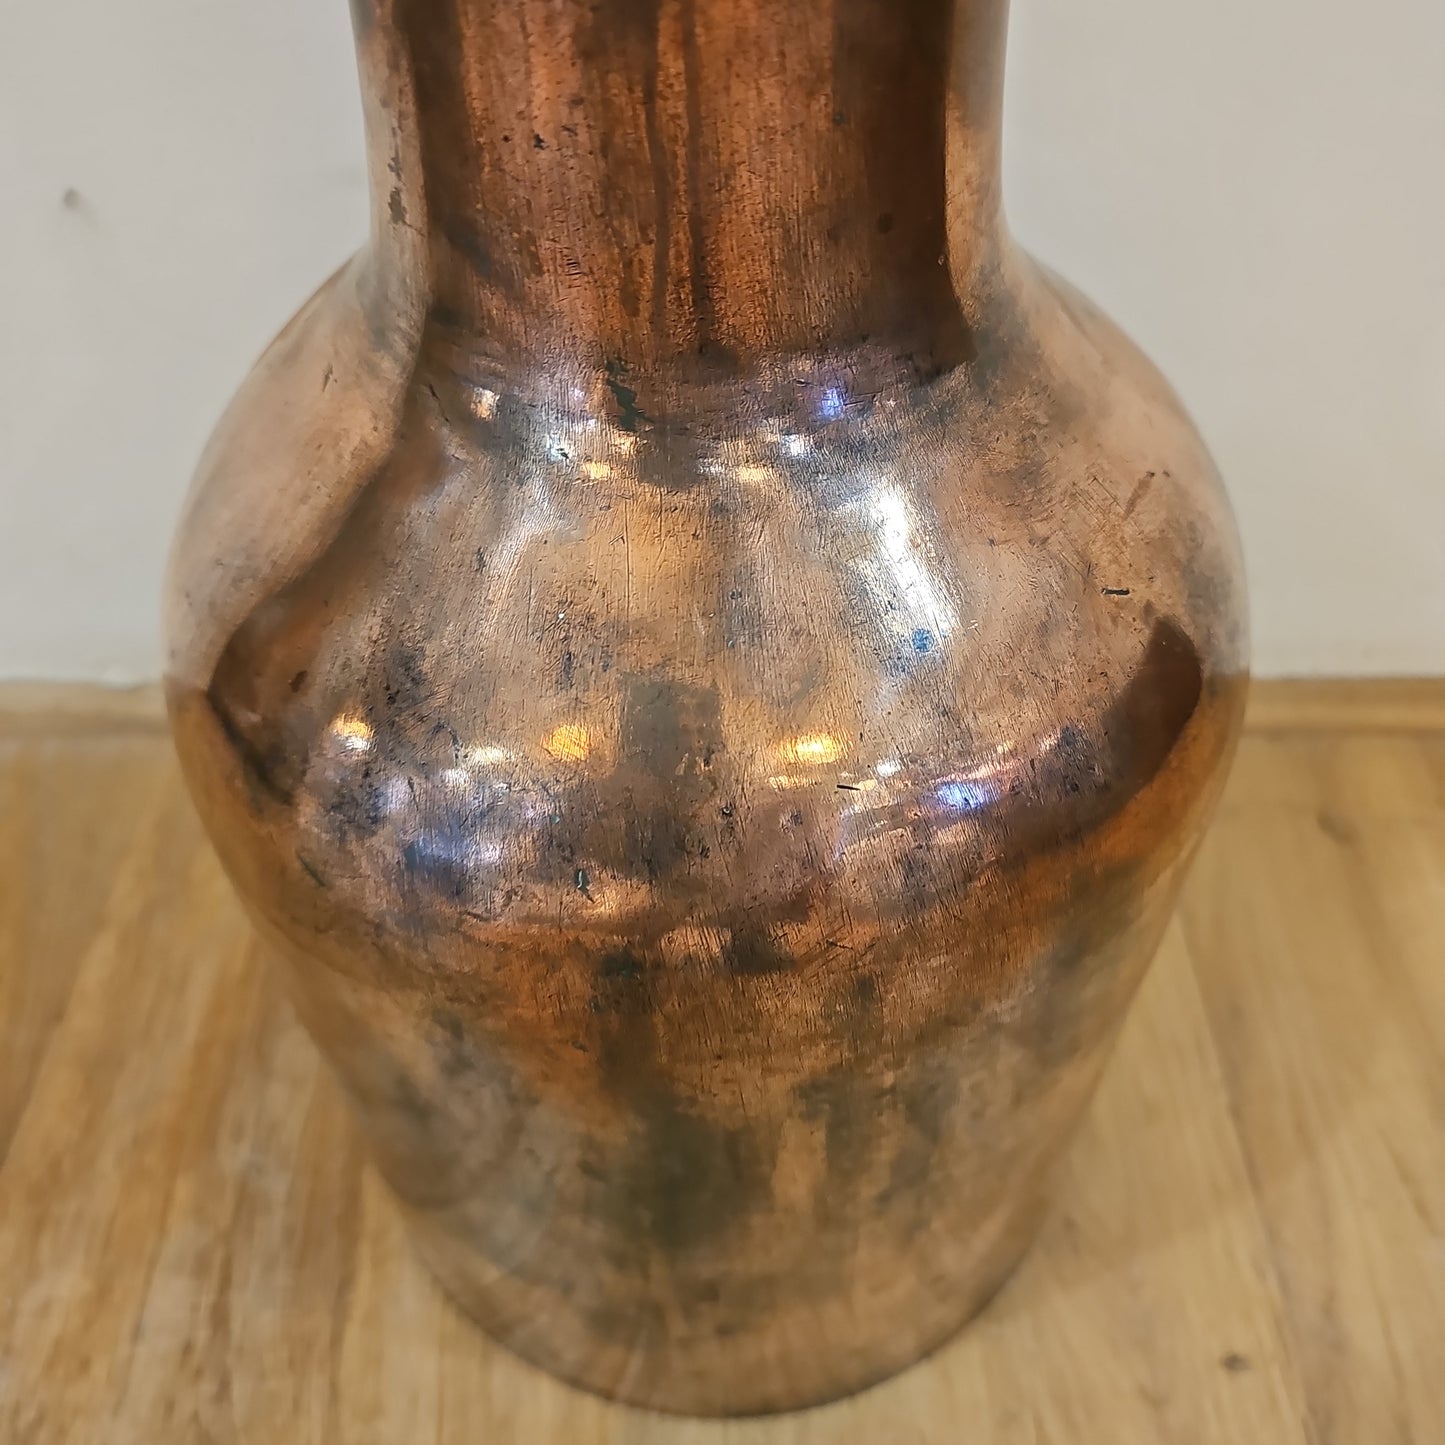 Antique French Copper Pharmacy Bottle